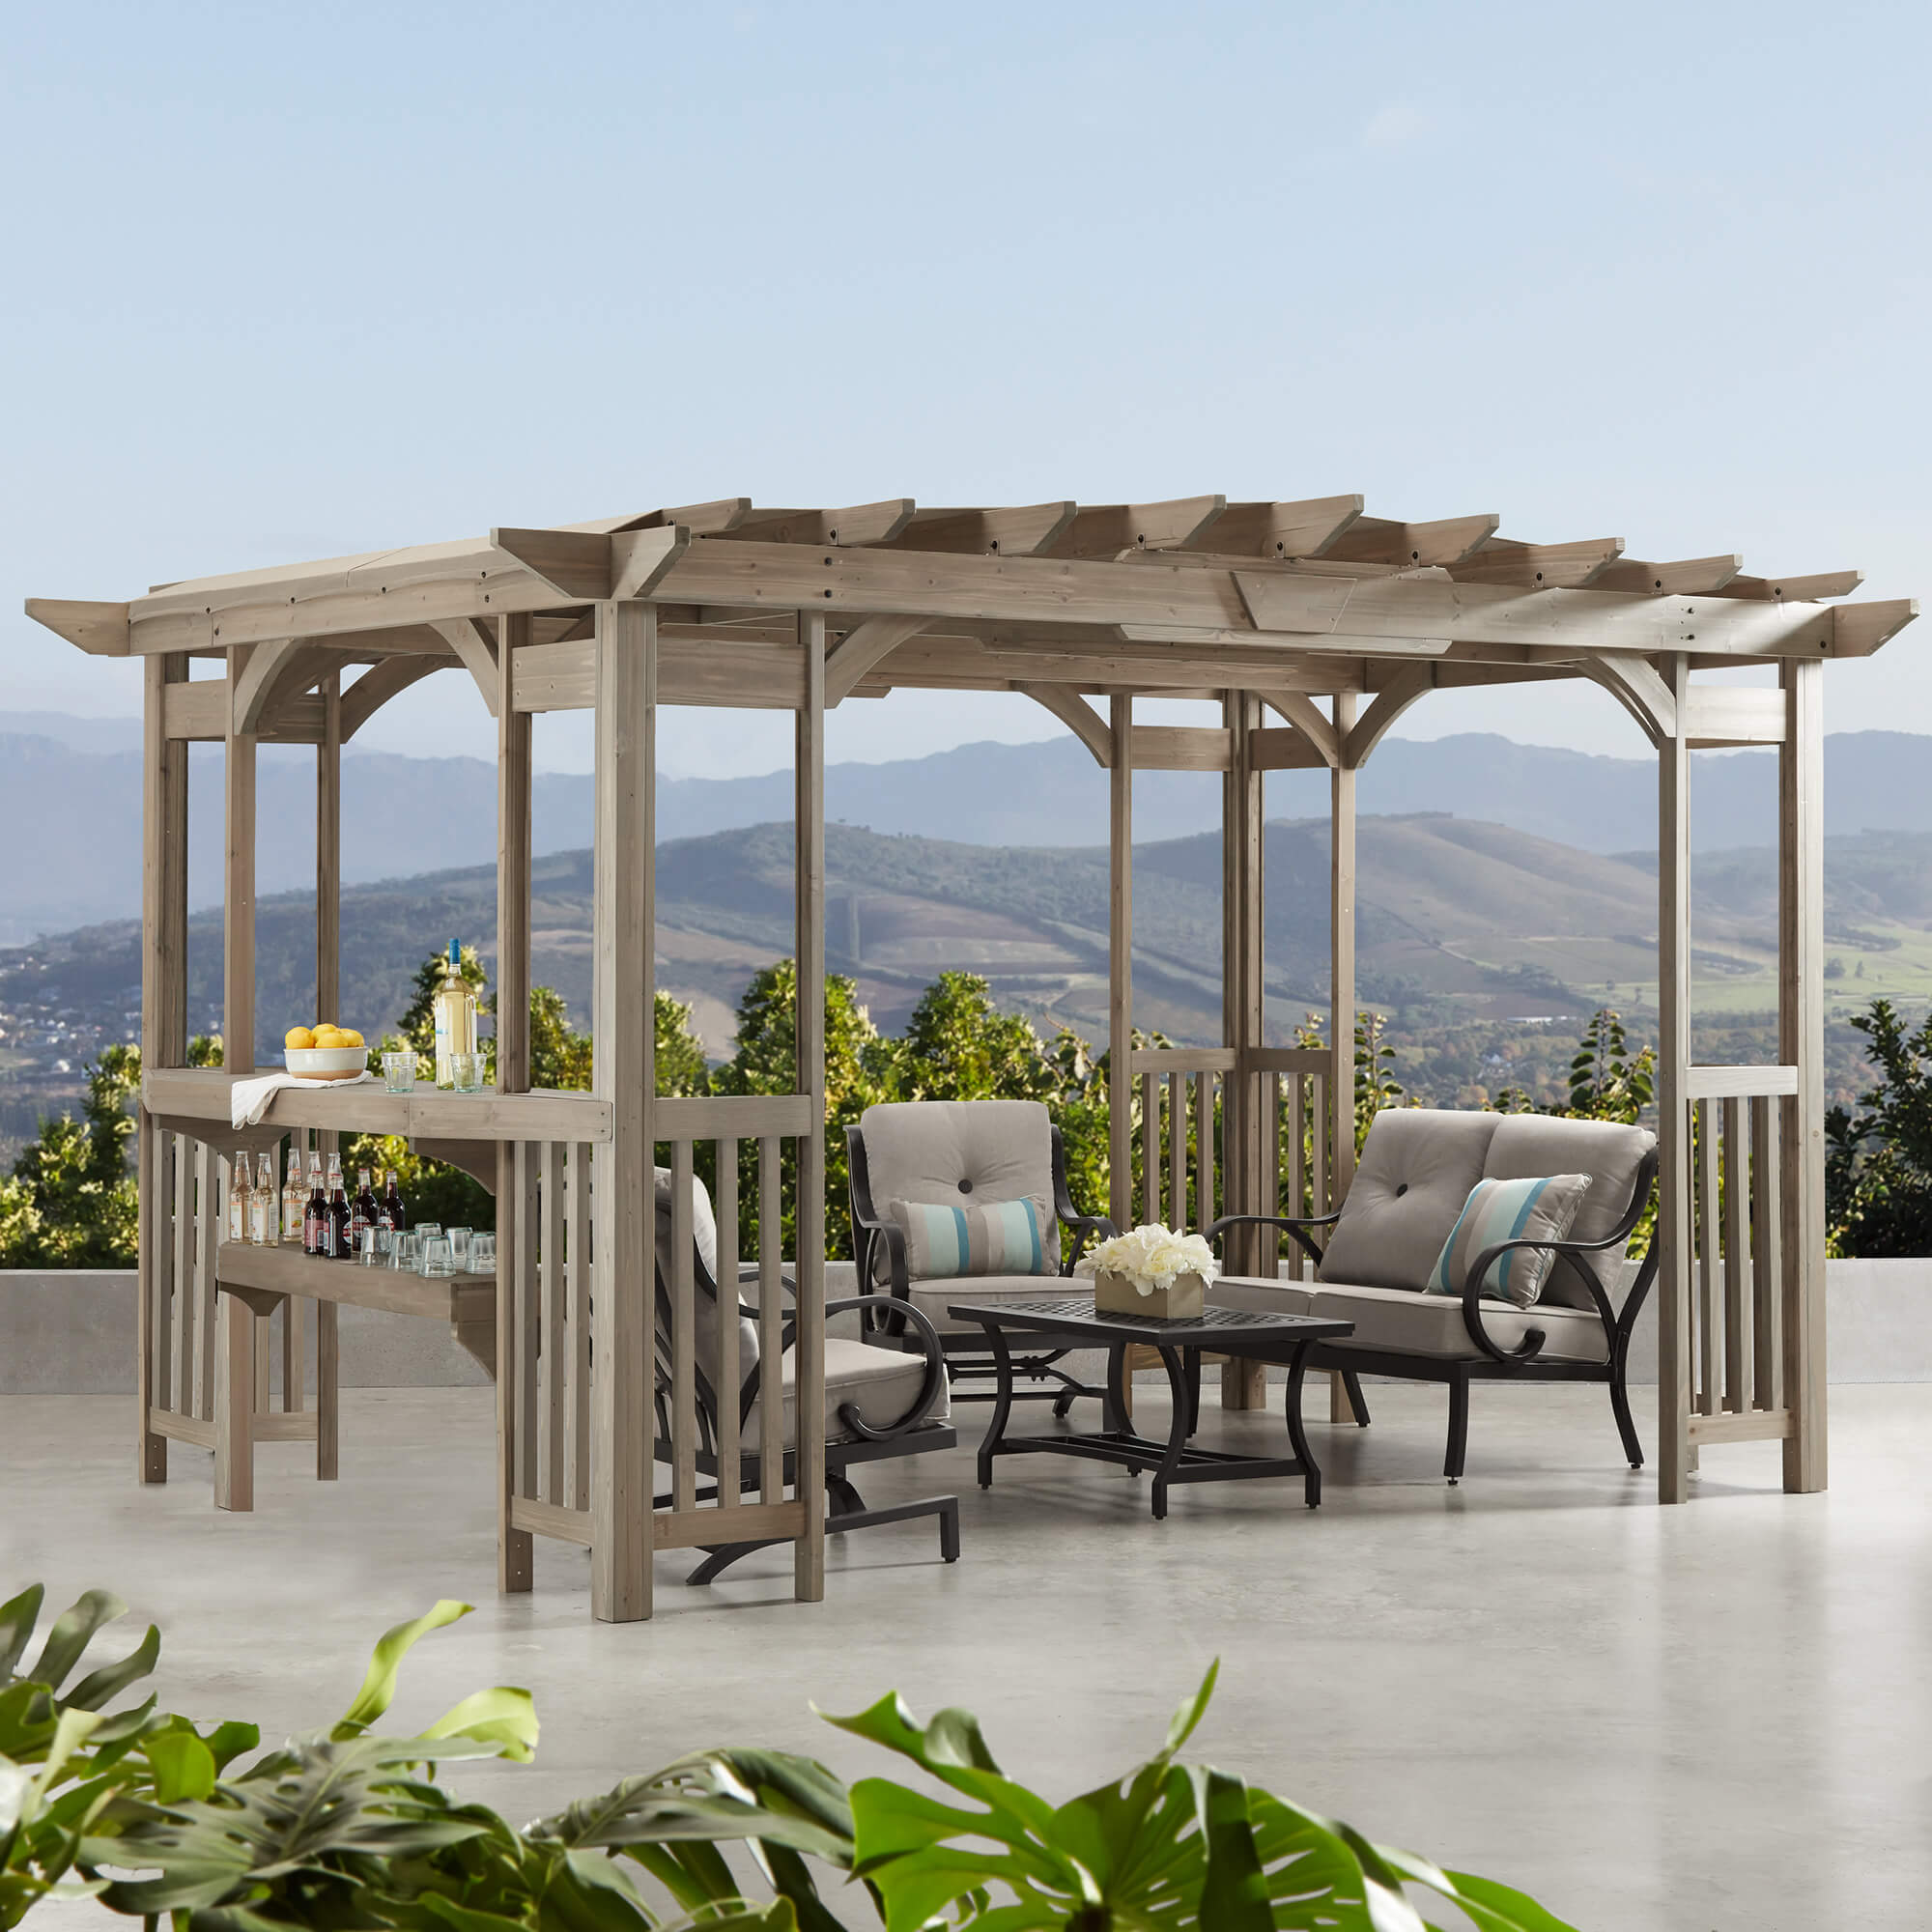 Yardistry Madison Cedar Pergola in Timber Gray, size 10 x 14, beautifully showcased on a panoramic terrace with a stunning mountainous background, perfect for luxurious outdoor lounging.